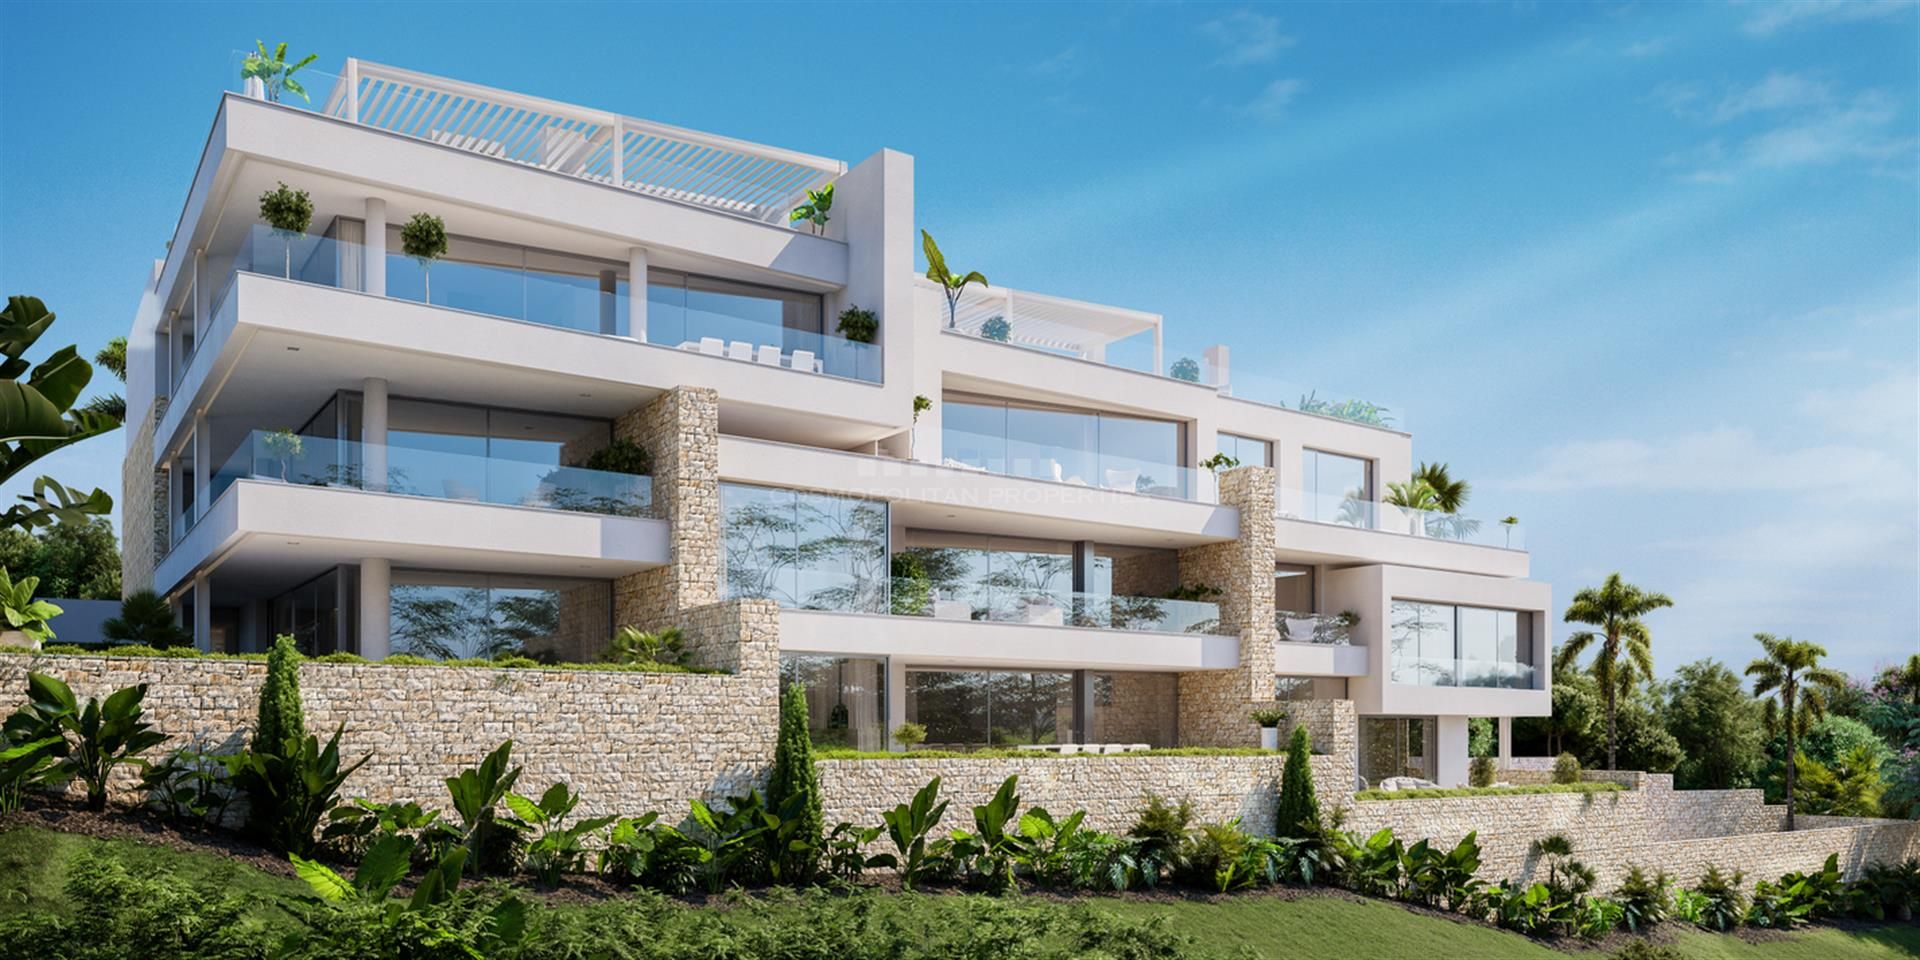 Spectacular brand new apartments style in Marbella